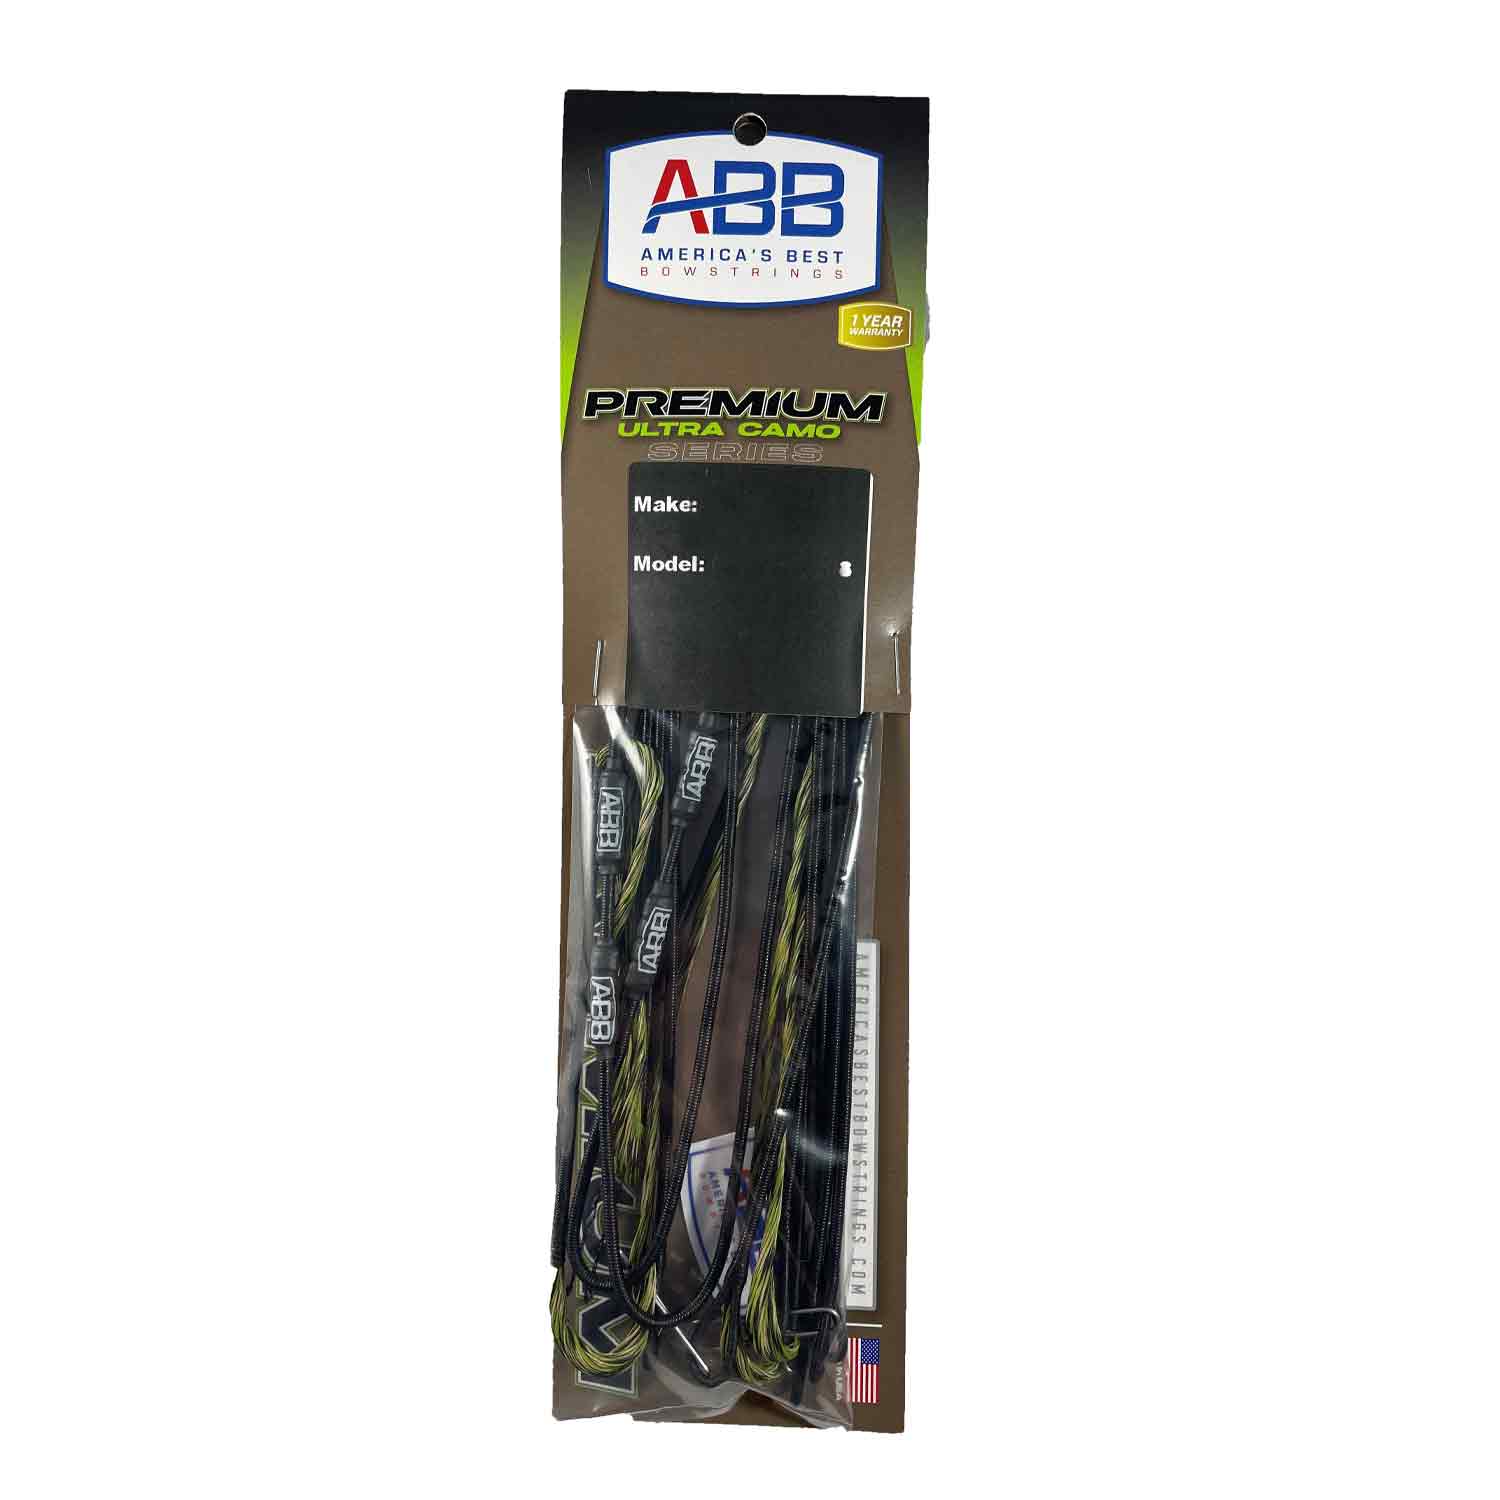 America's Best Premium Camo Complete String and Cable Set